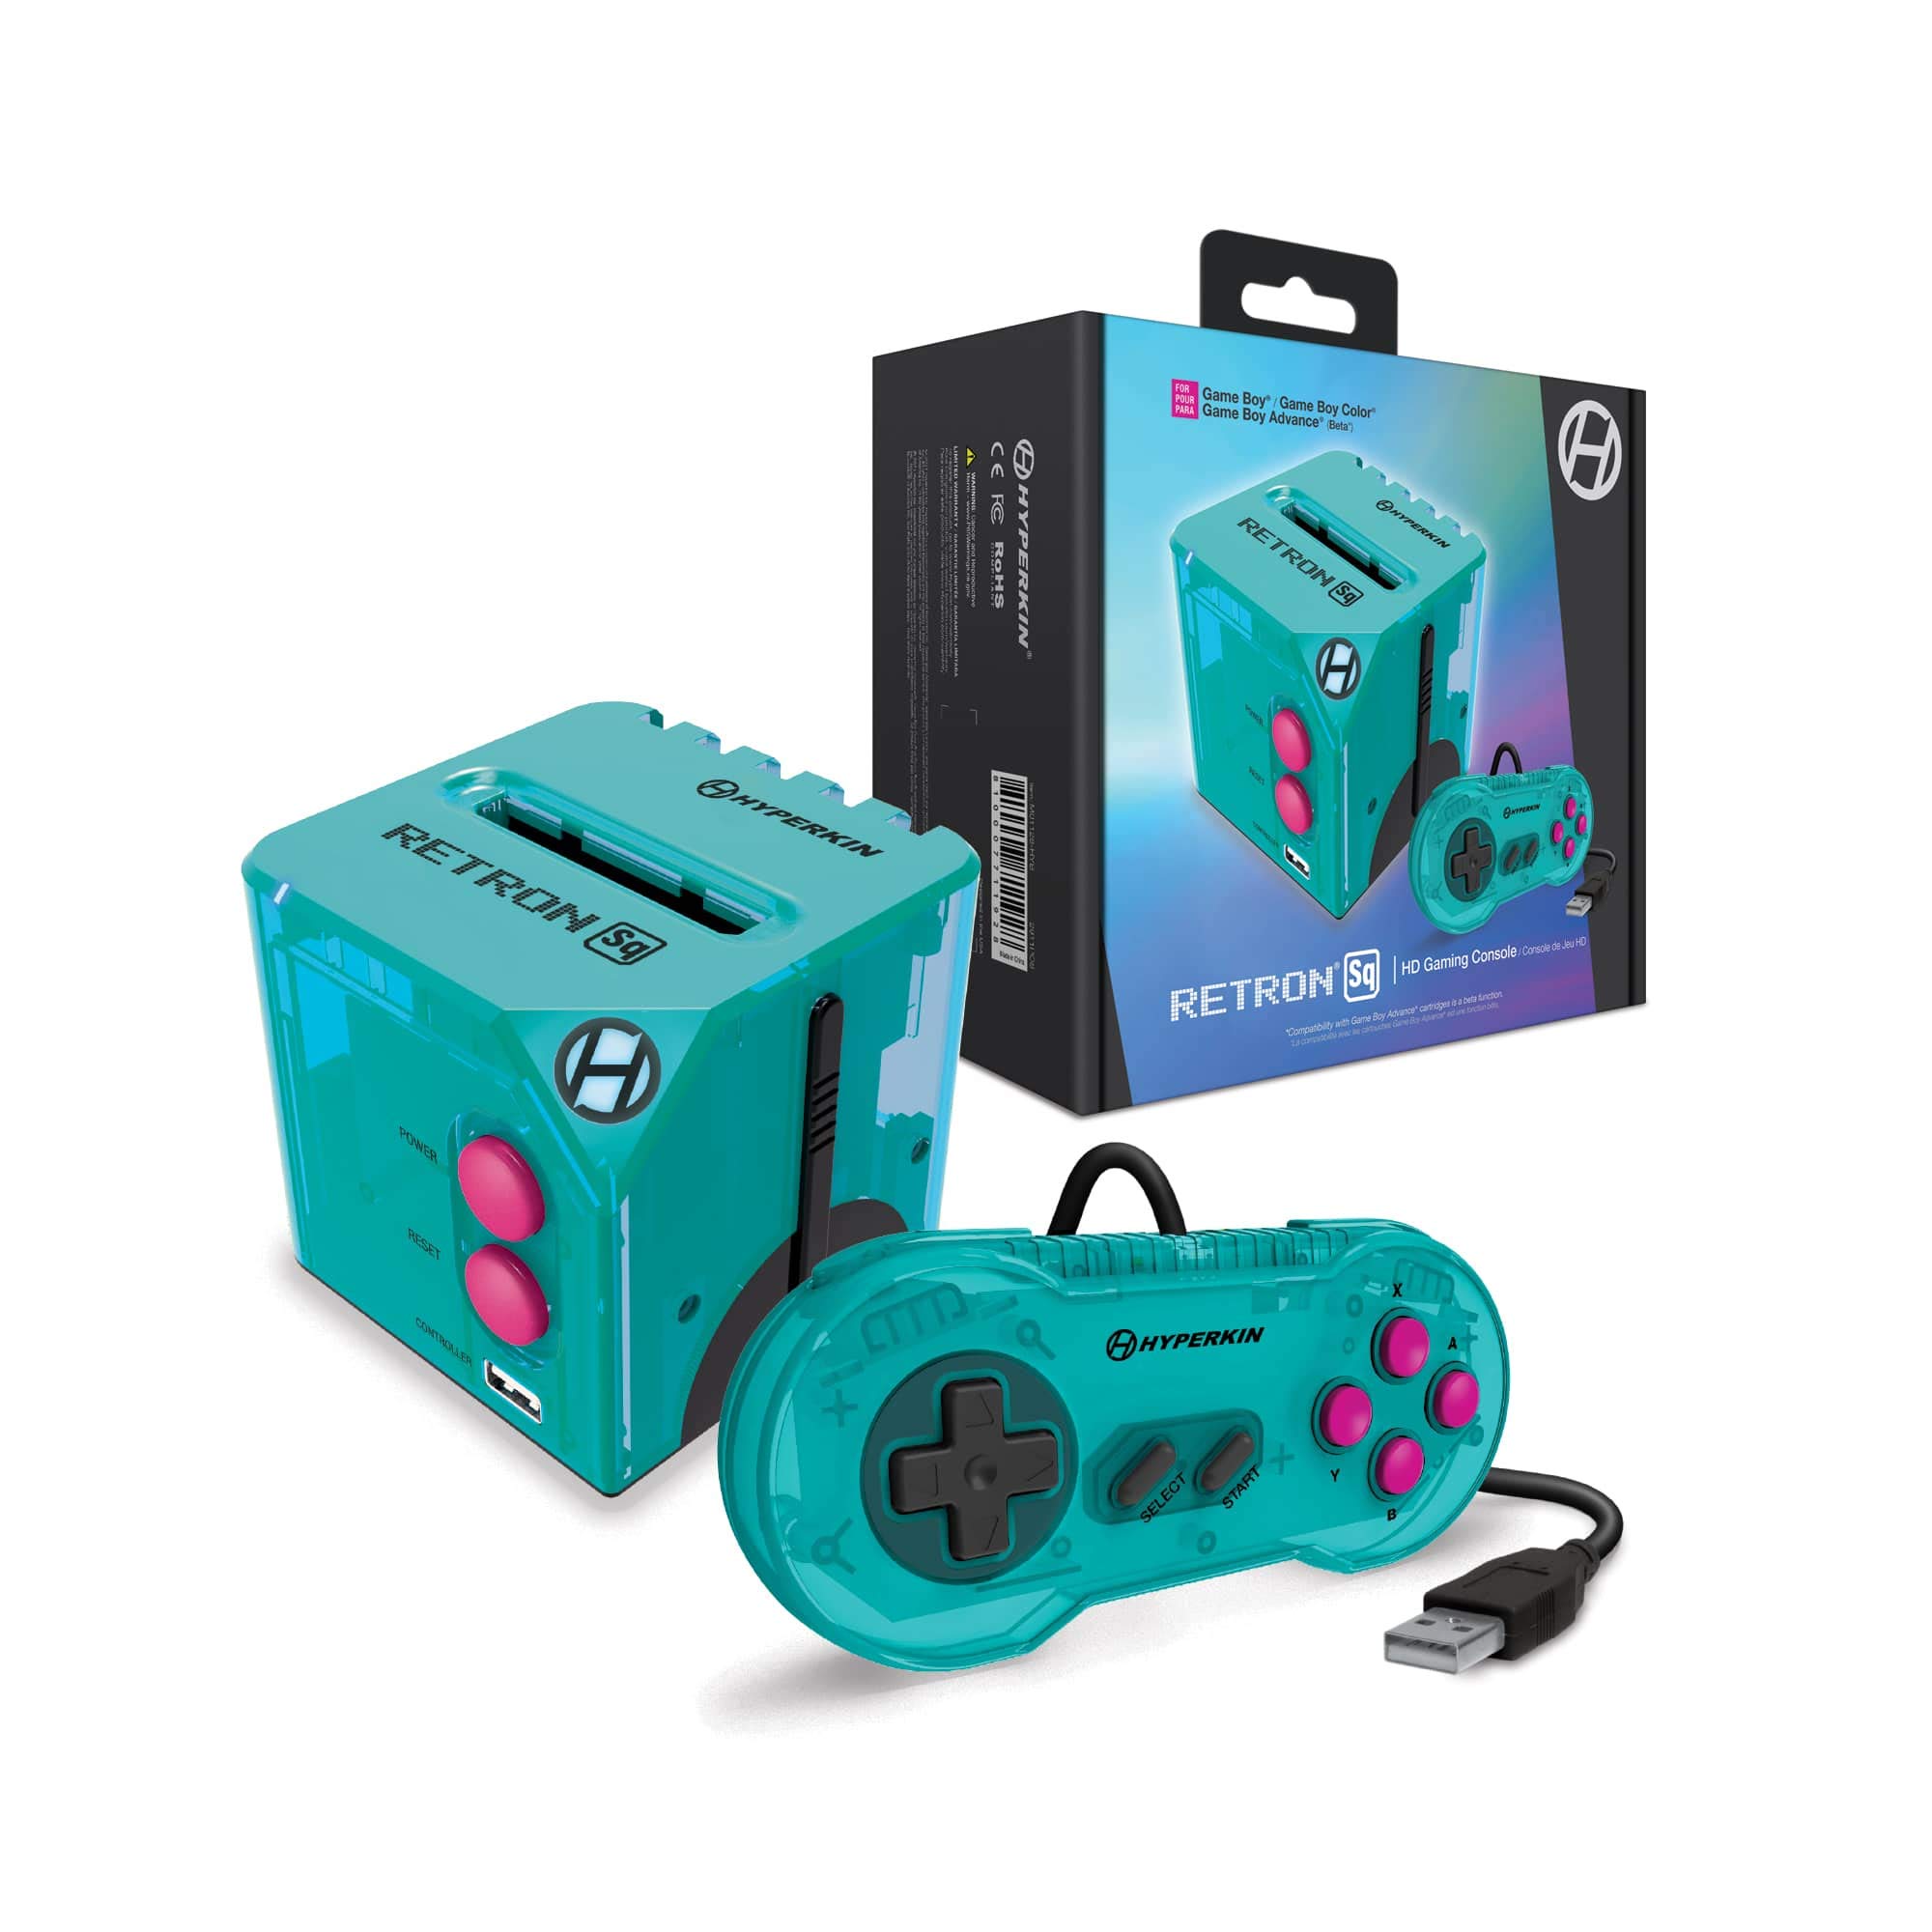 RetroN-Sq HD Gaming Console for Game Boy / Color / Advance - Turquoise - (W7)